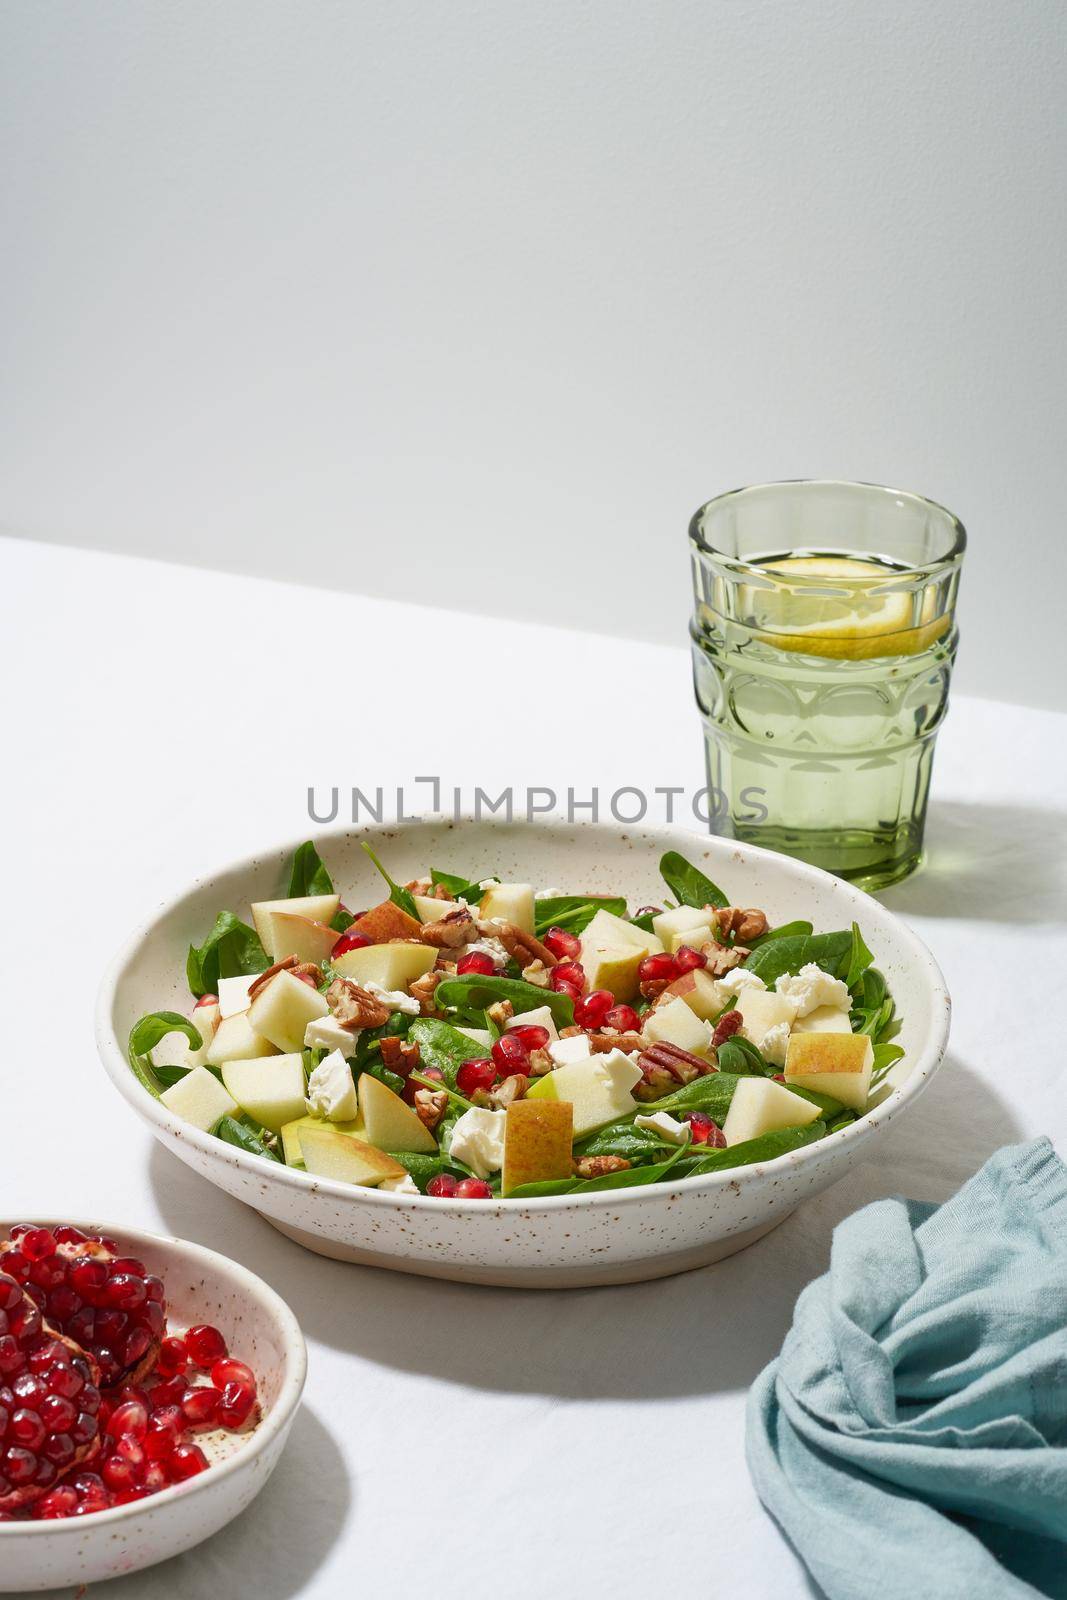 Fruits salad with nuts, balanced food, clean eating. Spinach with apples, pecans and feta, garnished with pomegranate seeds in bowl on table with white tablecloth. Hard light, shadows, vertical